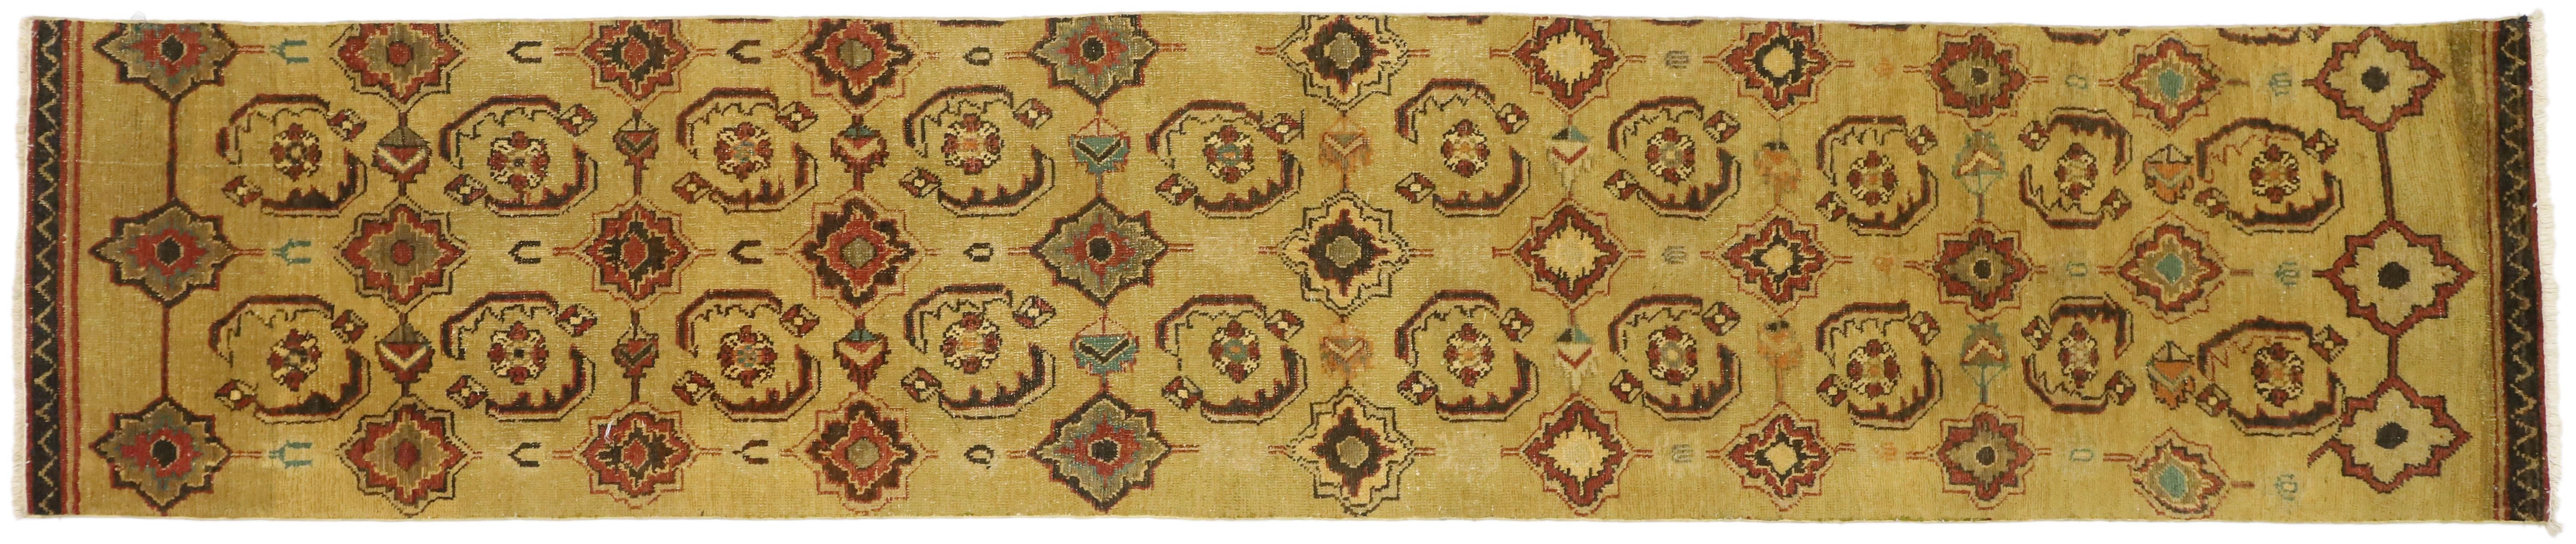 Pair of Vintage Turkish Oushak Carpet Runners with Rustic Arts and Crafts Style For Sale 2